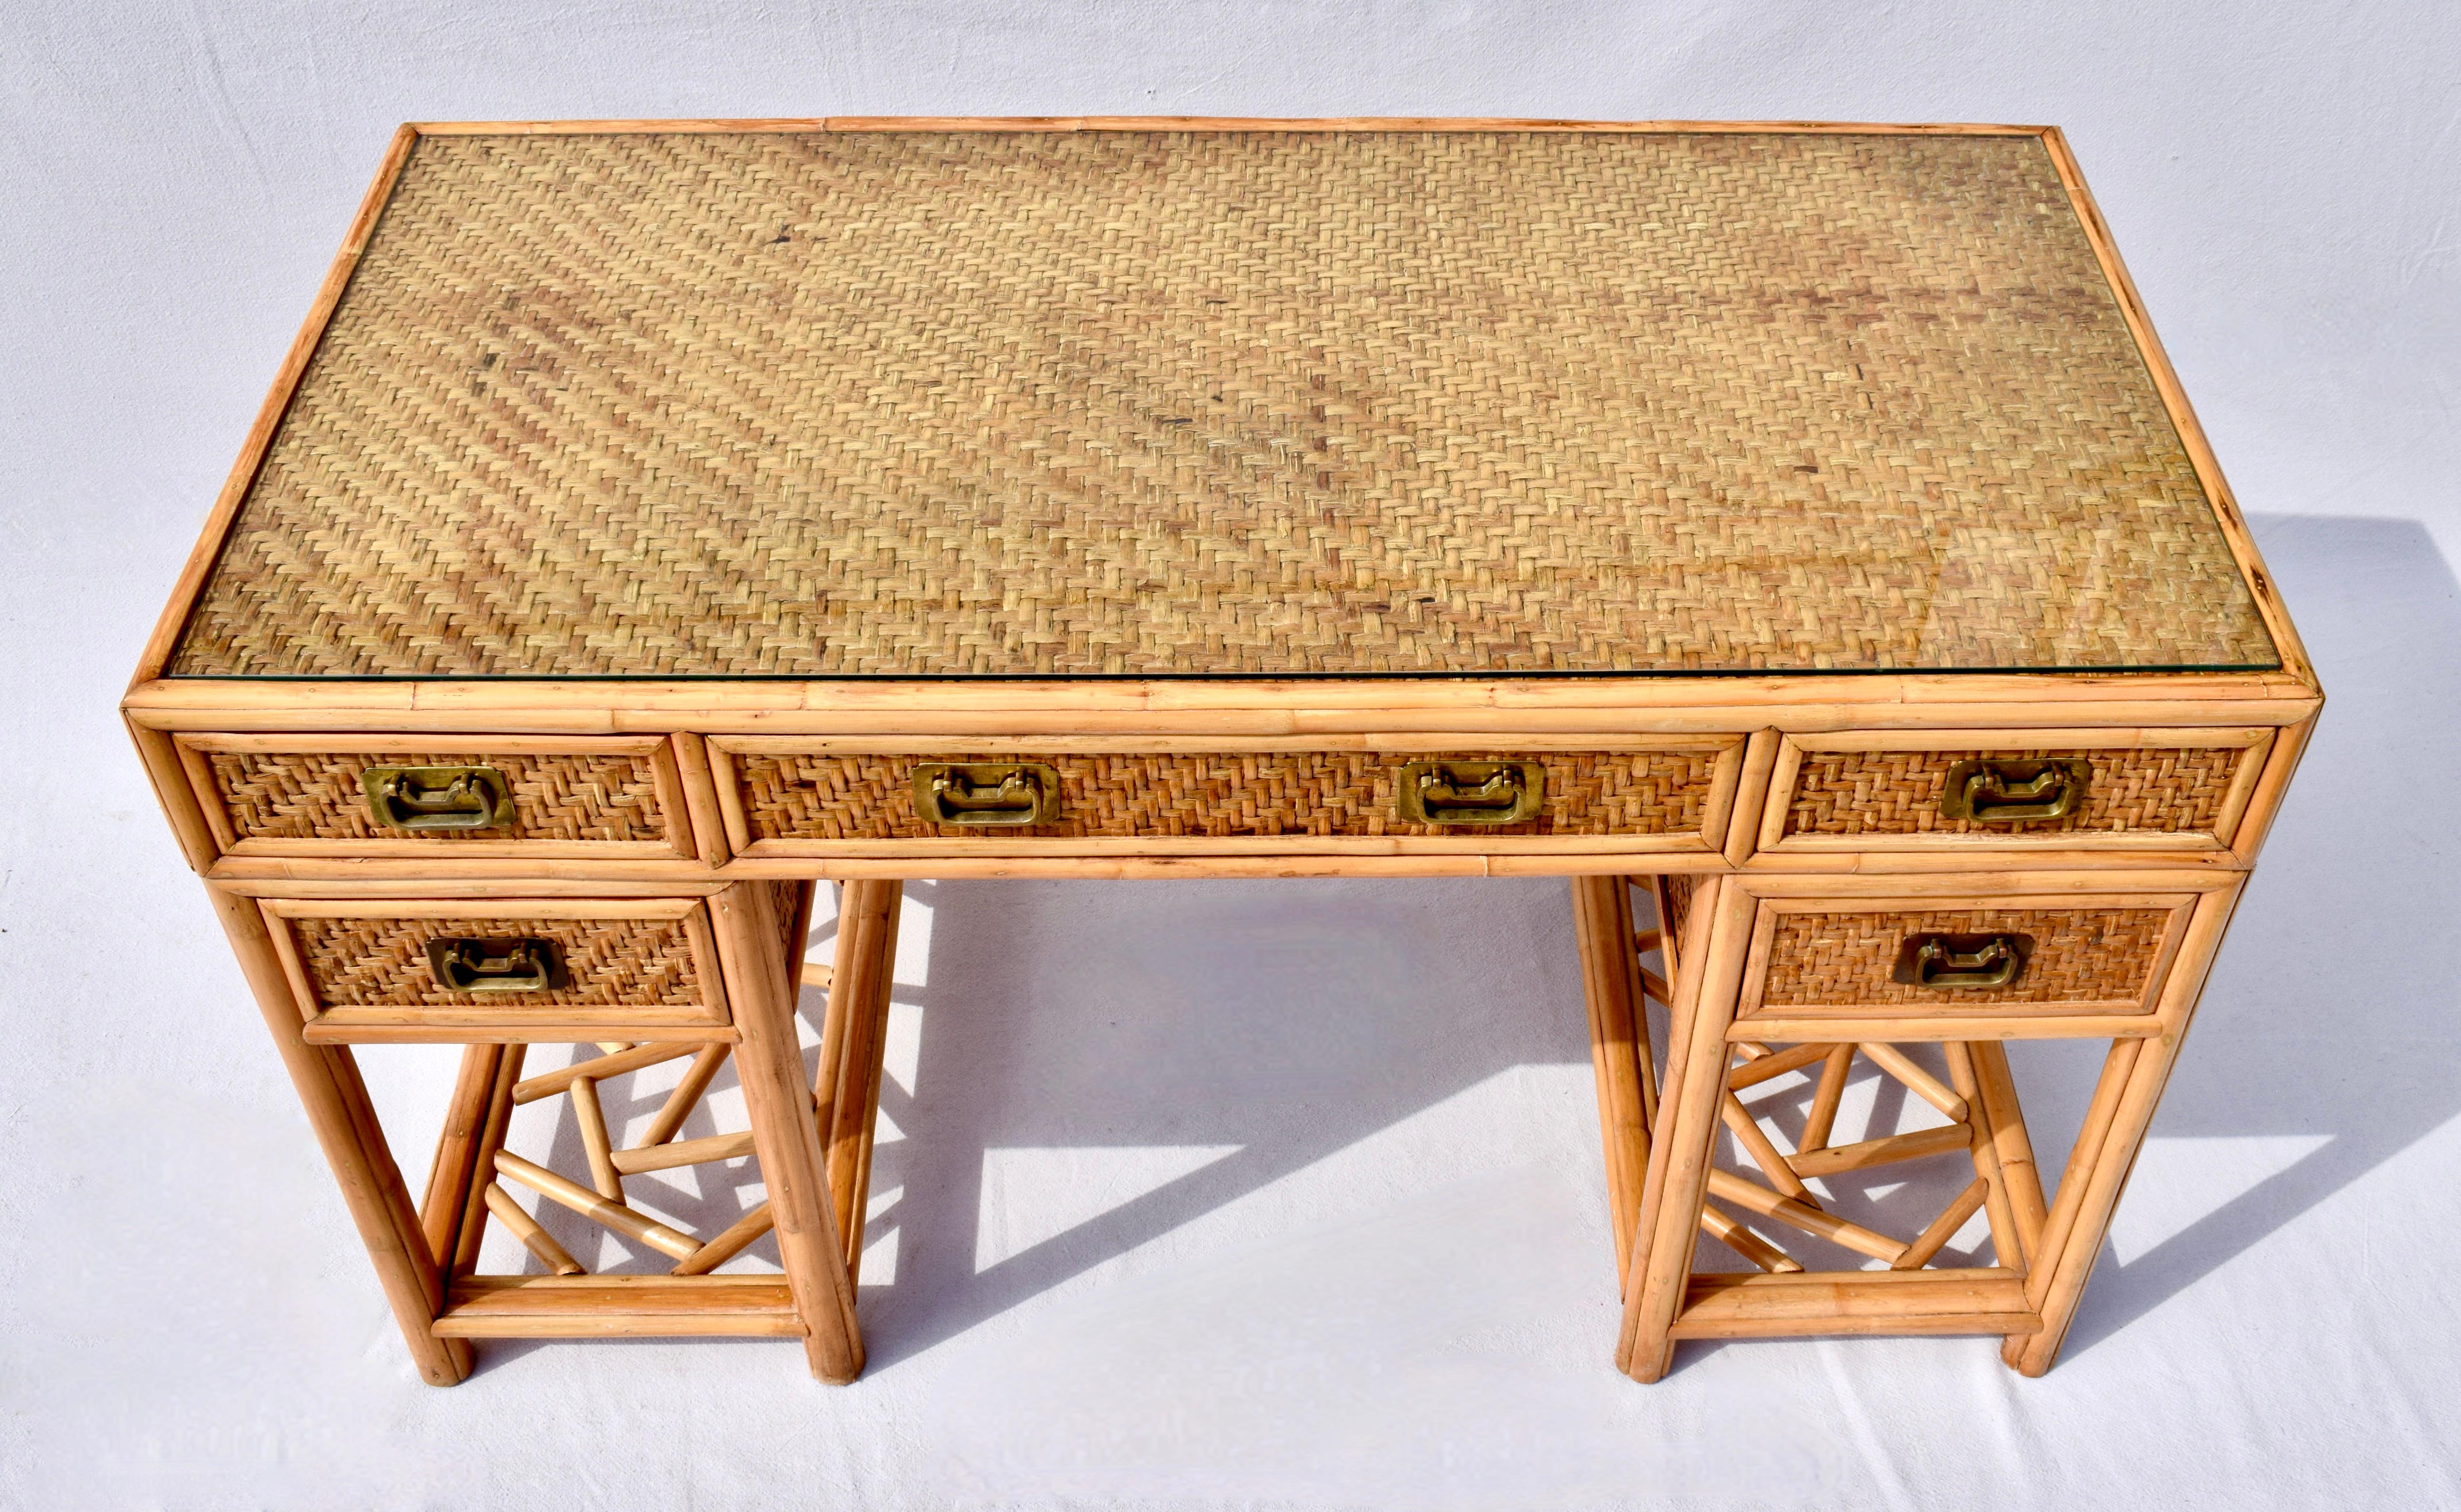 Midcentury British Colonial Campaign style 5-drawer writing desk or work table with distinct Chinese Chippendale design elements. Marvelous bamboo frame construction wrapped in woven basket weave cane rattan features generous work surface and custom